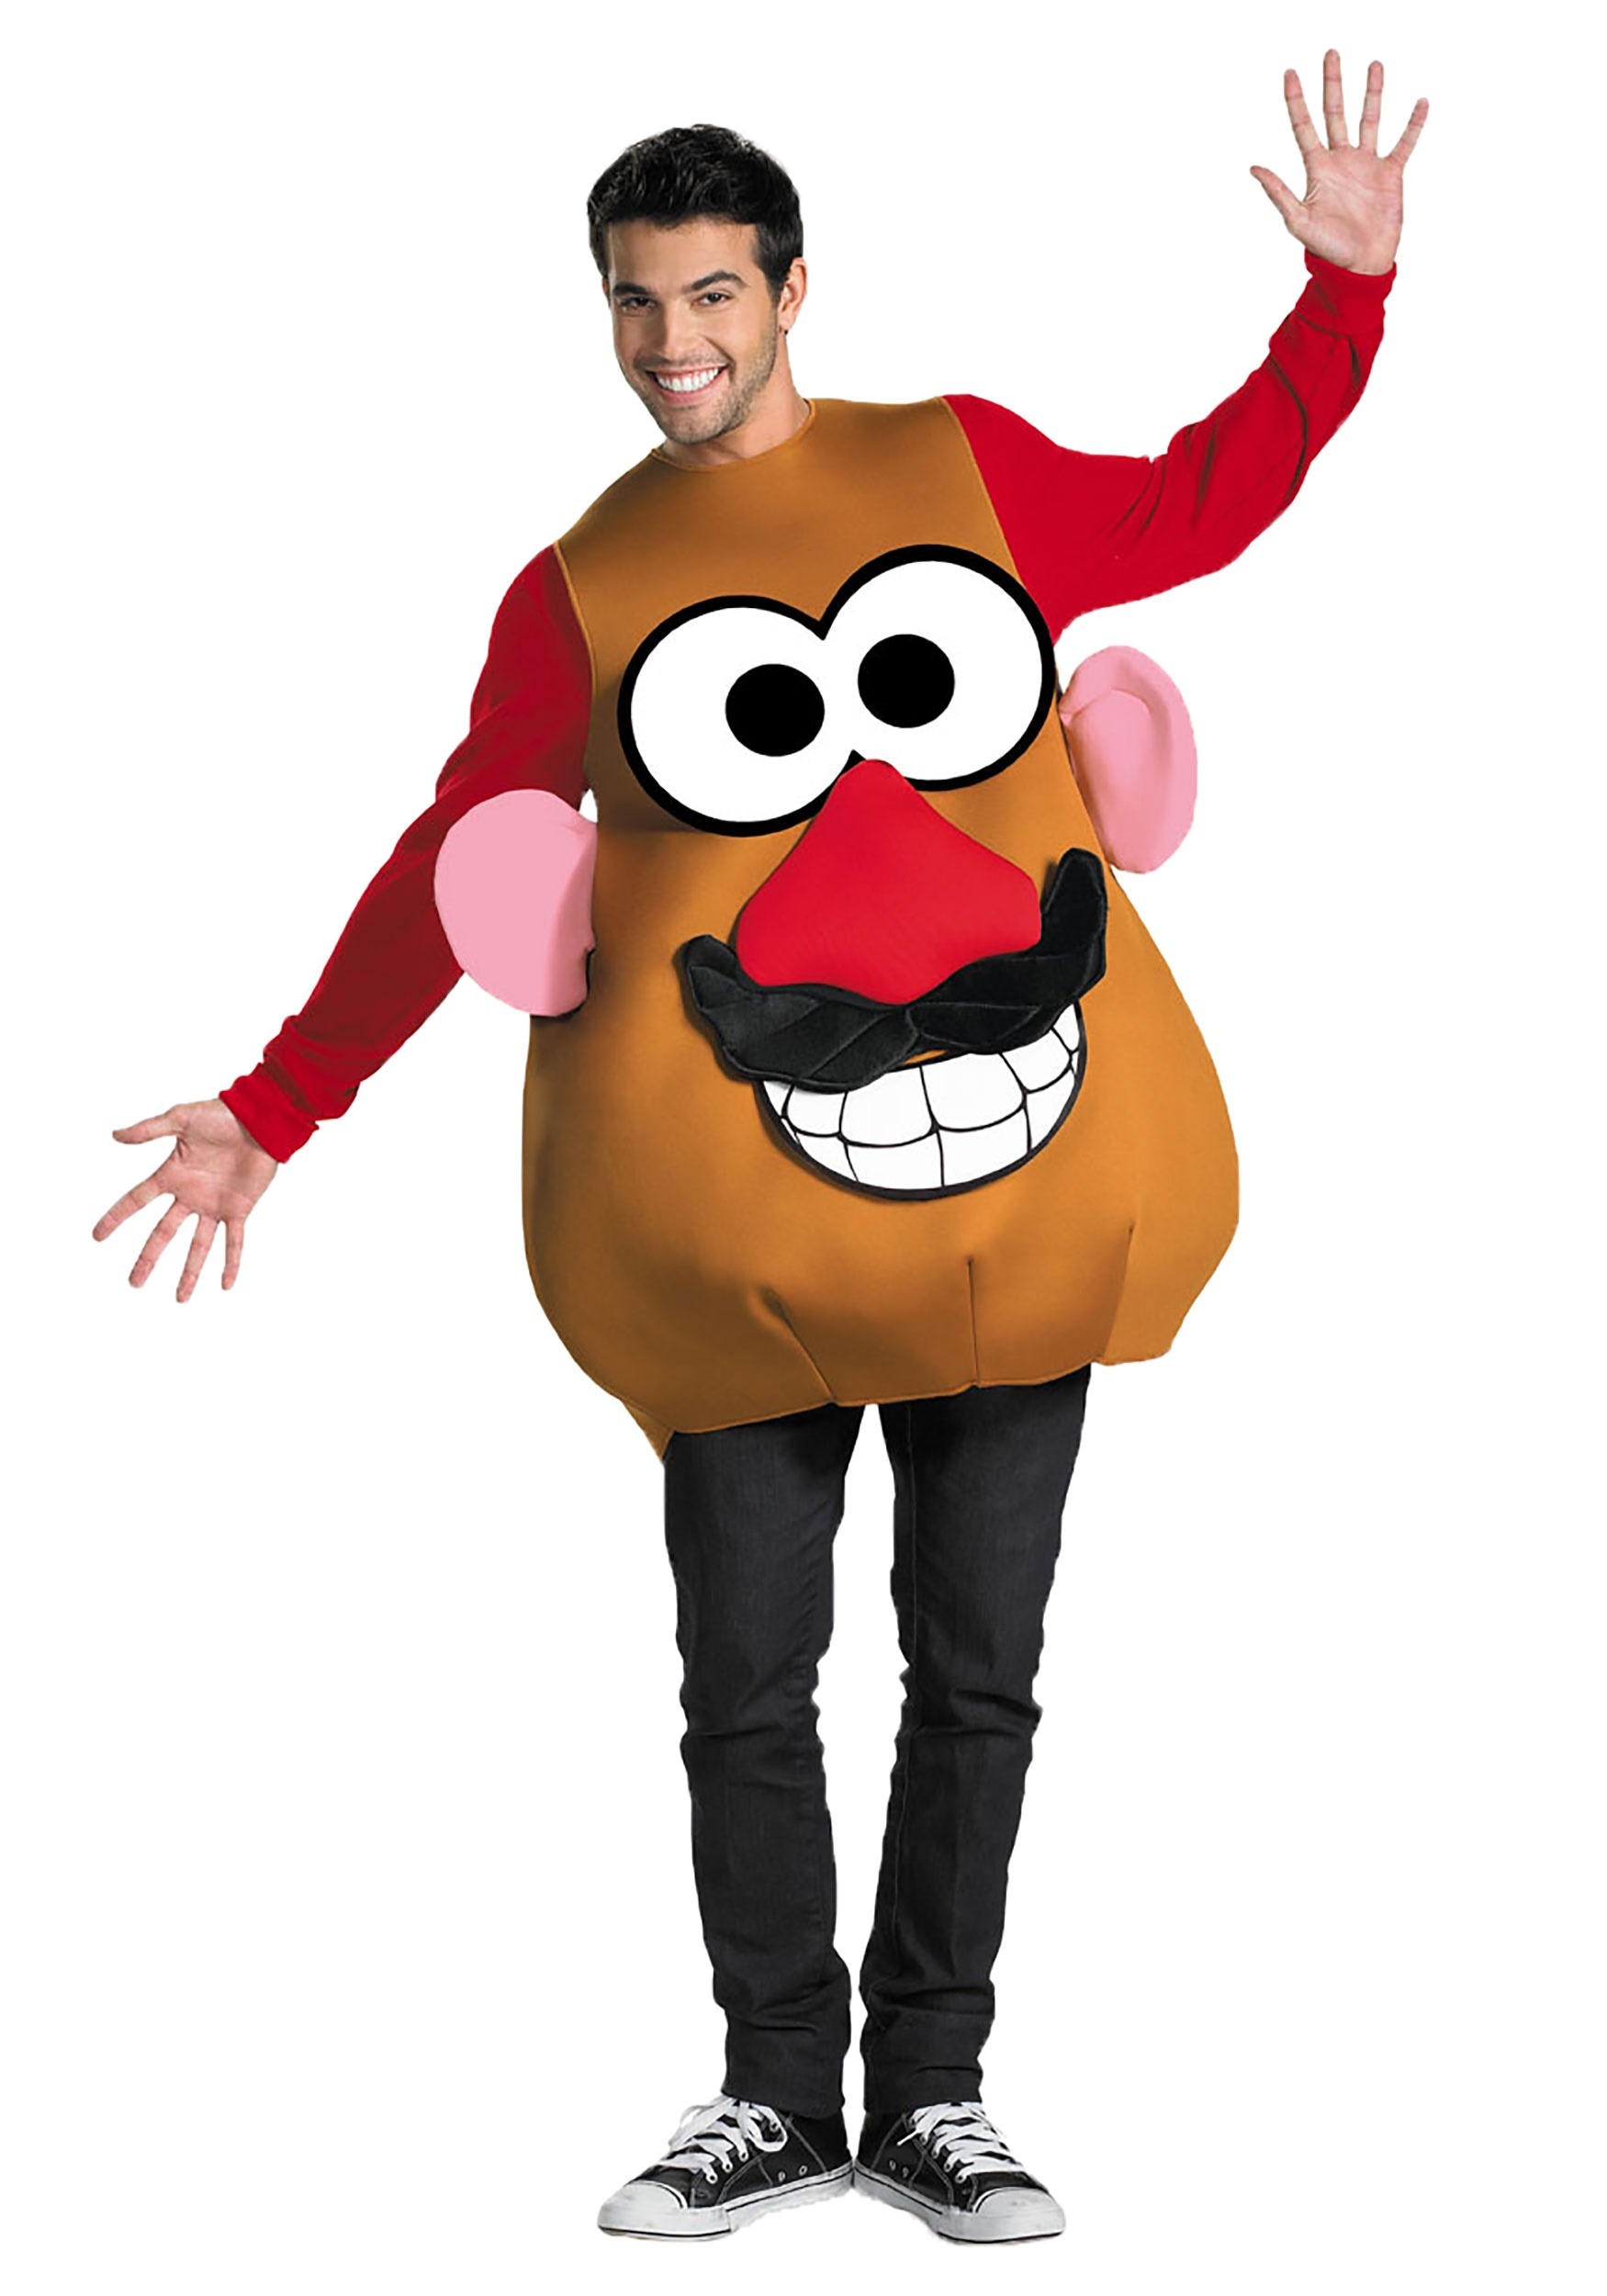 Mr/Mrs Potato Head Plus Size Costume for Adults | Toy Story Couple Costumes